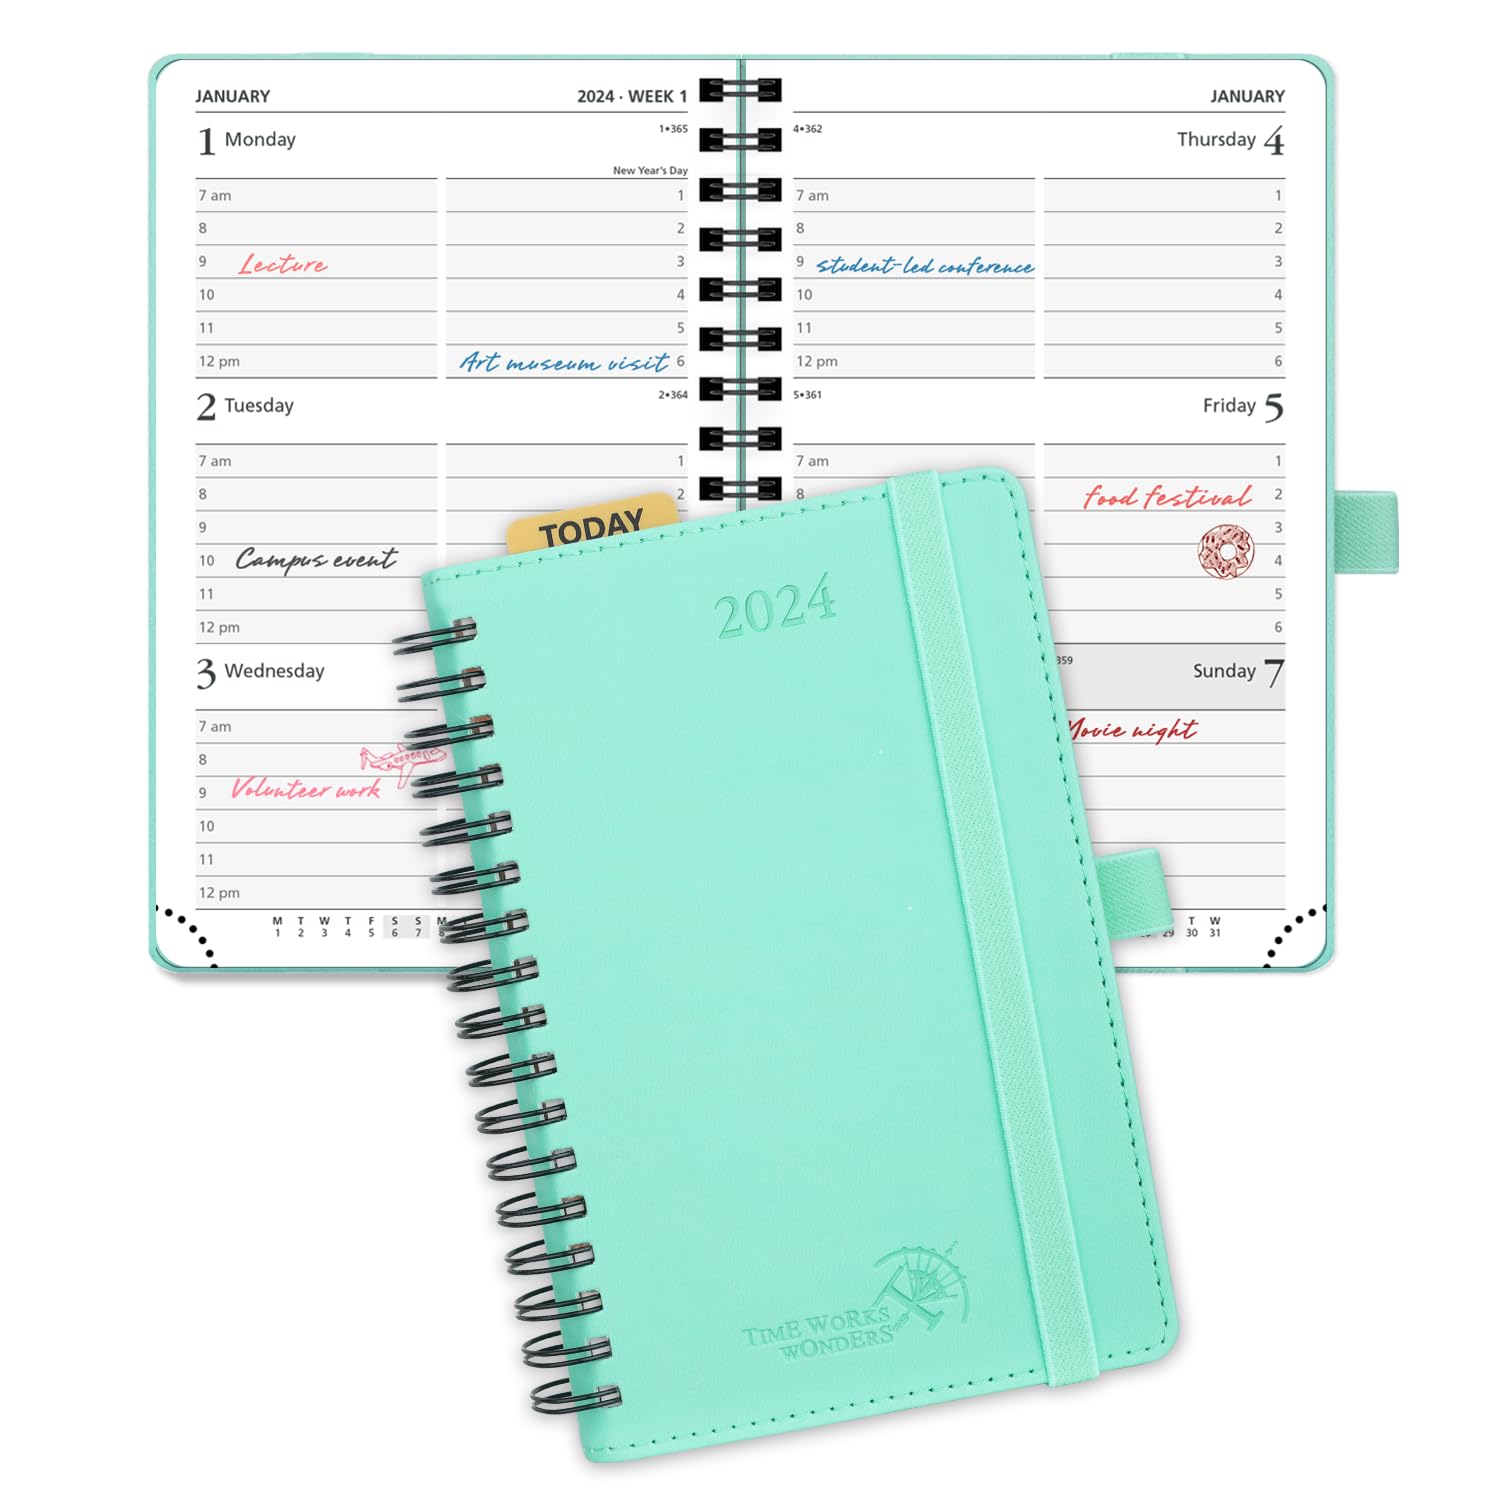 POPRUN 2024 Weekly Planner Spiral Bound - Hourly Schedule & Vertical Weekly Layout - 2024 Planner for Time Management,6.5" x 8.5"- Monthly Tabs, Pen Holder, Leather Soft Cover - Green